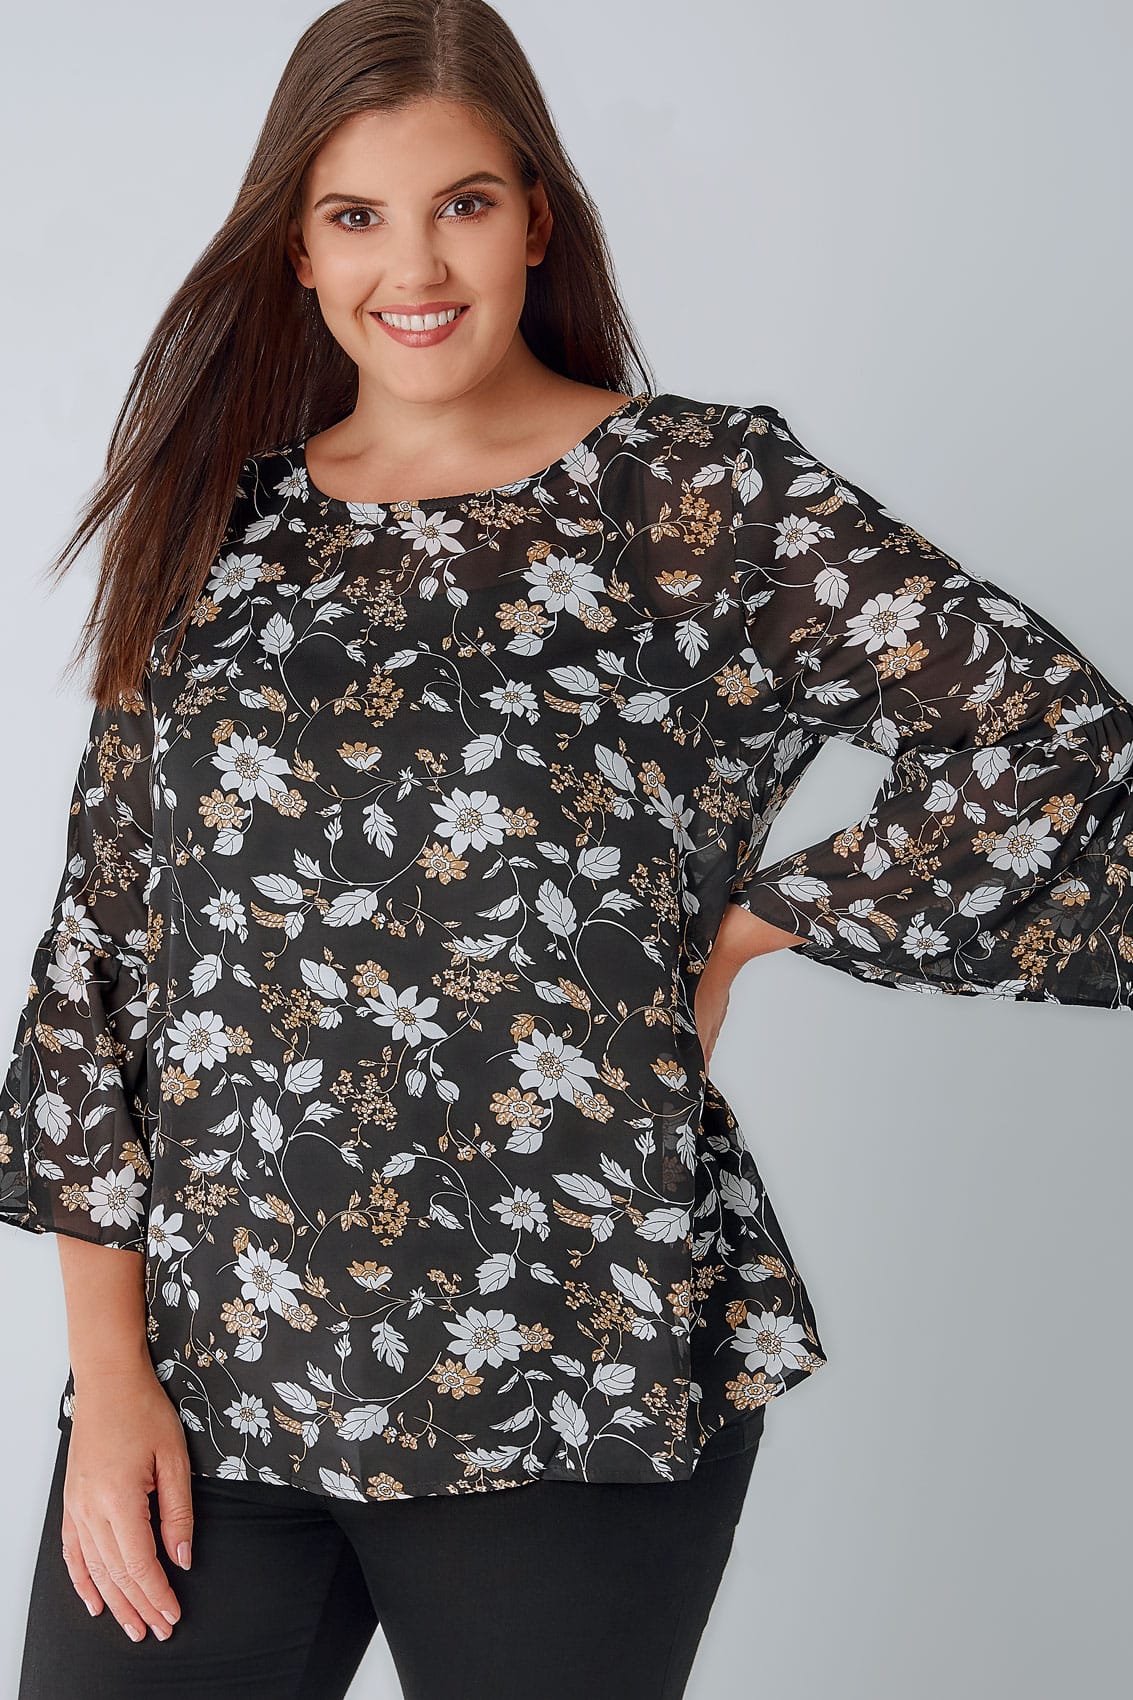 Blue Vanilla Curve Black Floral Print Chiffon Top With Flute Sleeves Plus Size 18 To 28